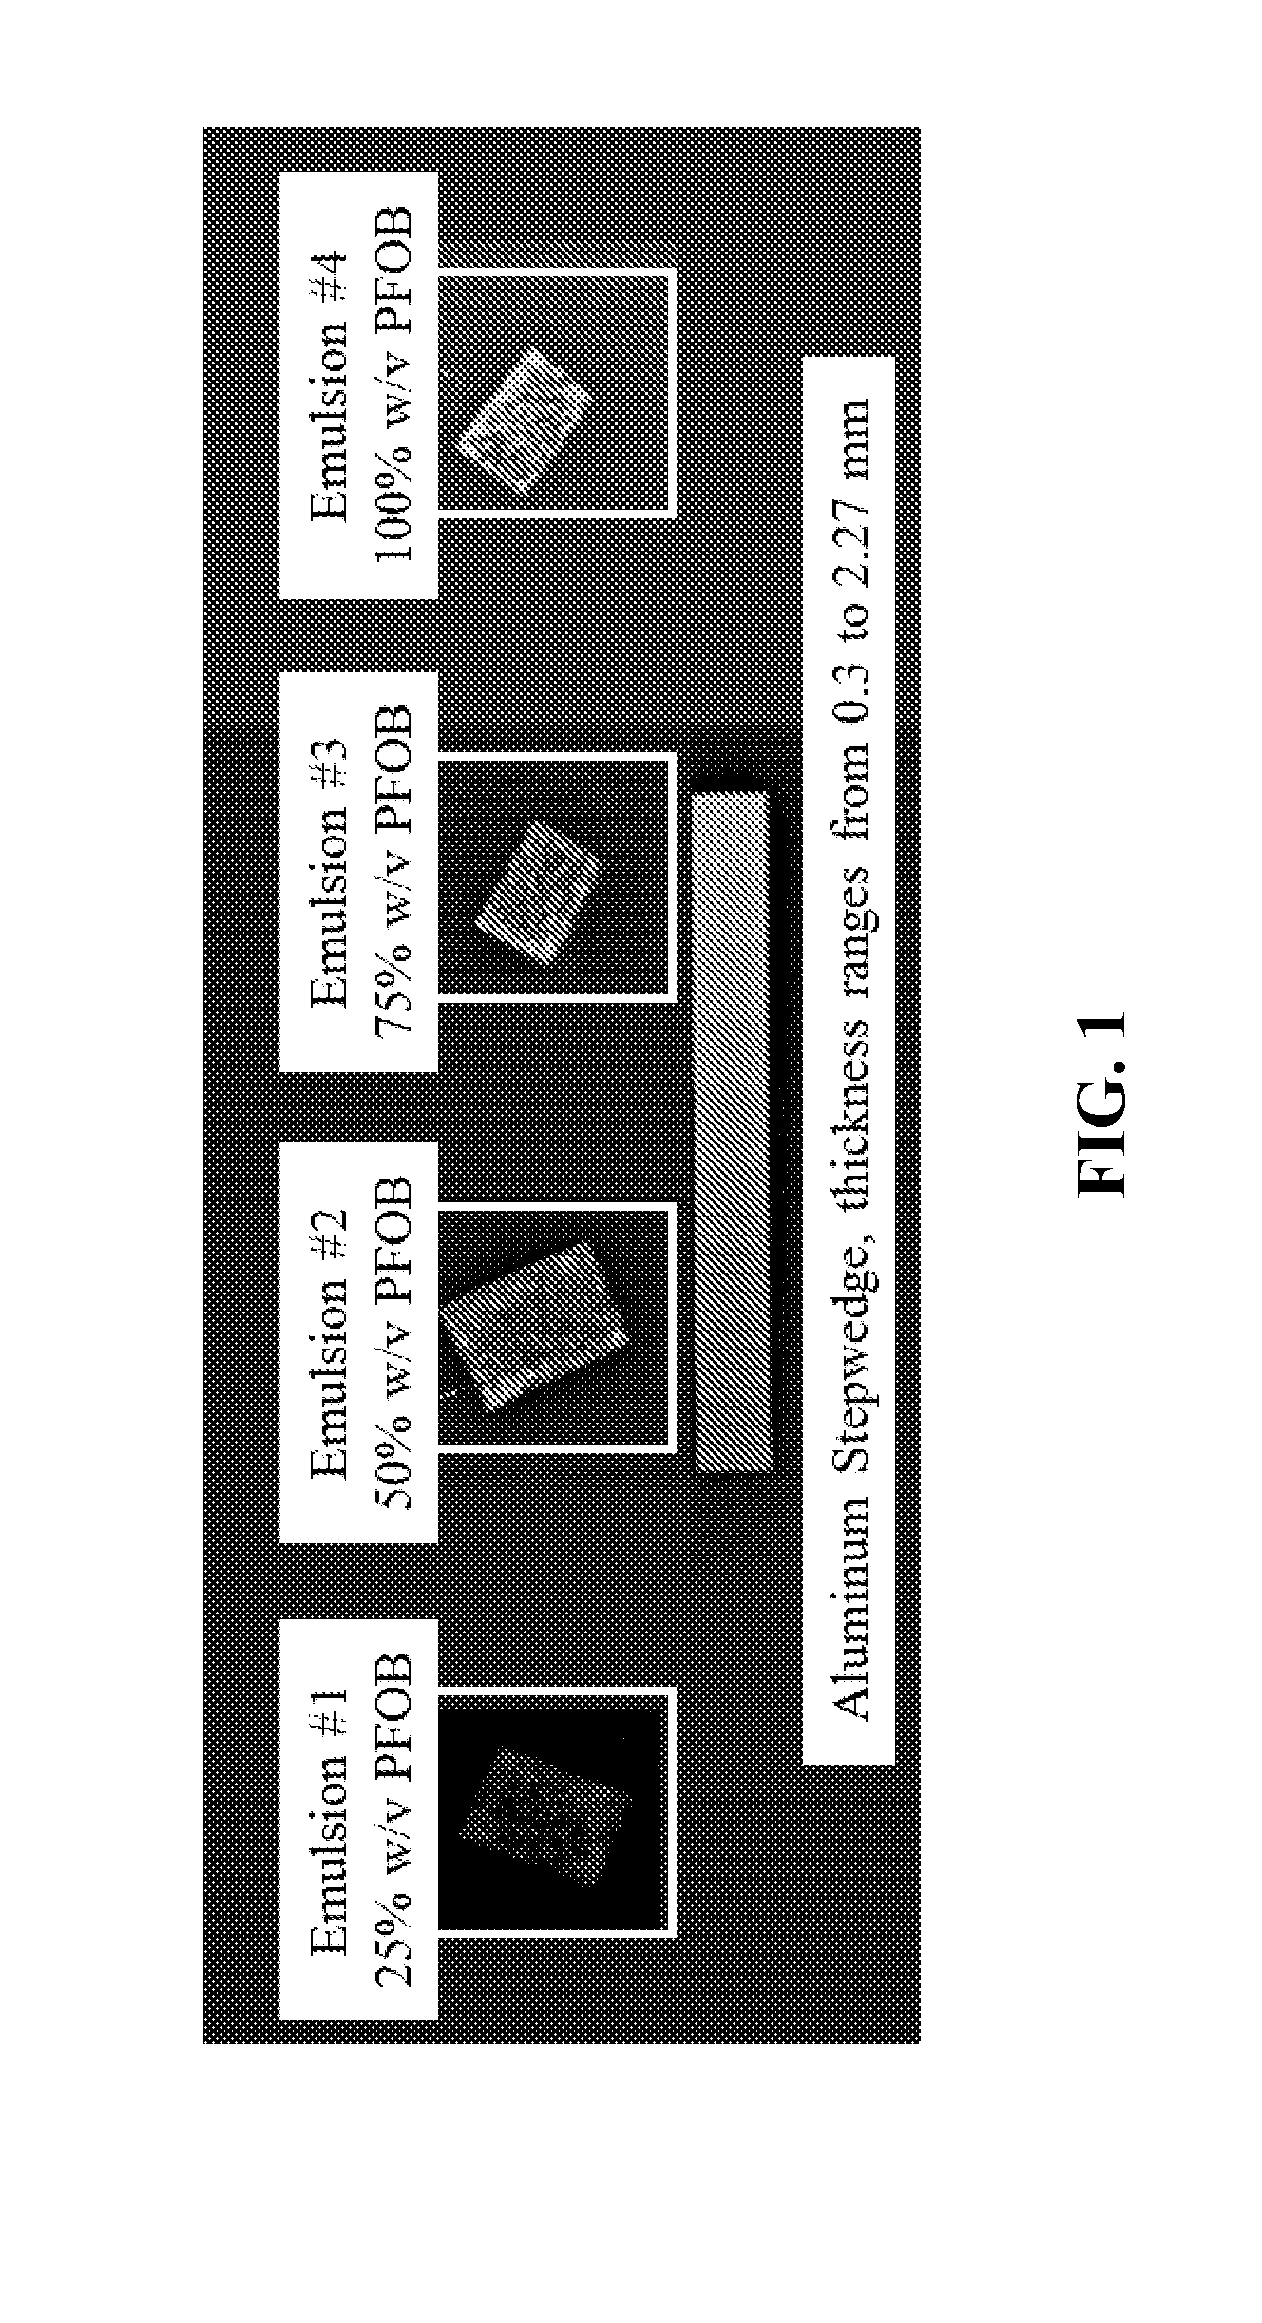 Bone Graft Substitute Containing a Temporary Contrast Agent and a Method of Generating Such and A Method of Use Thereof